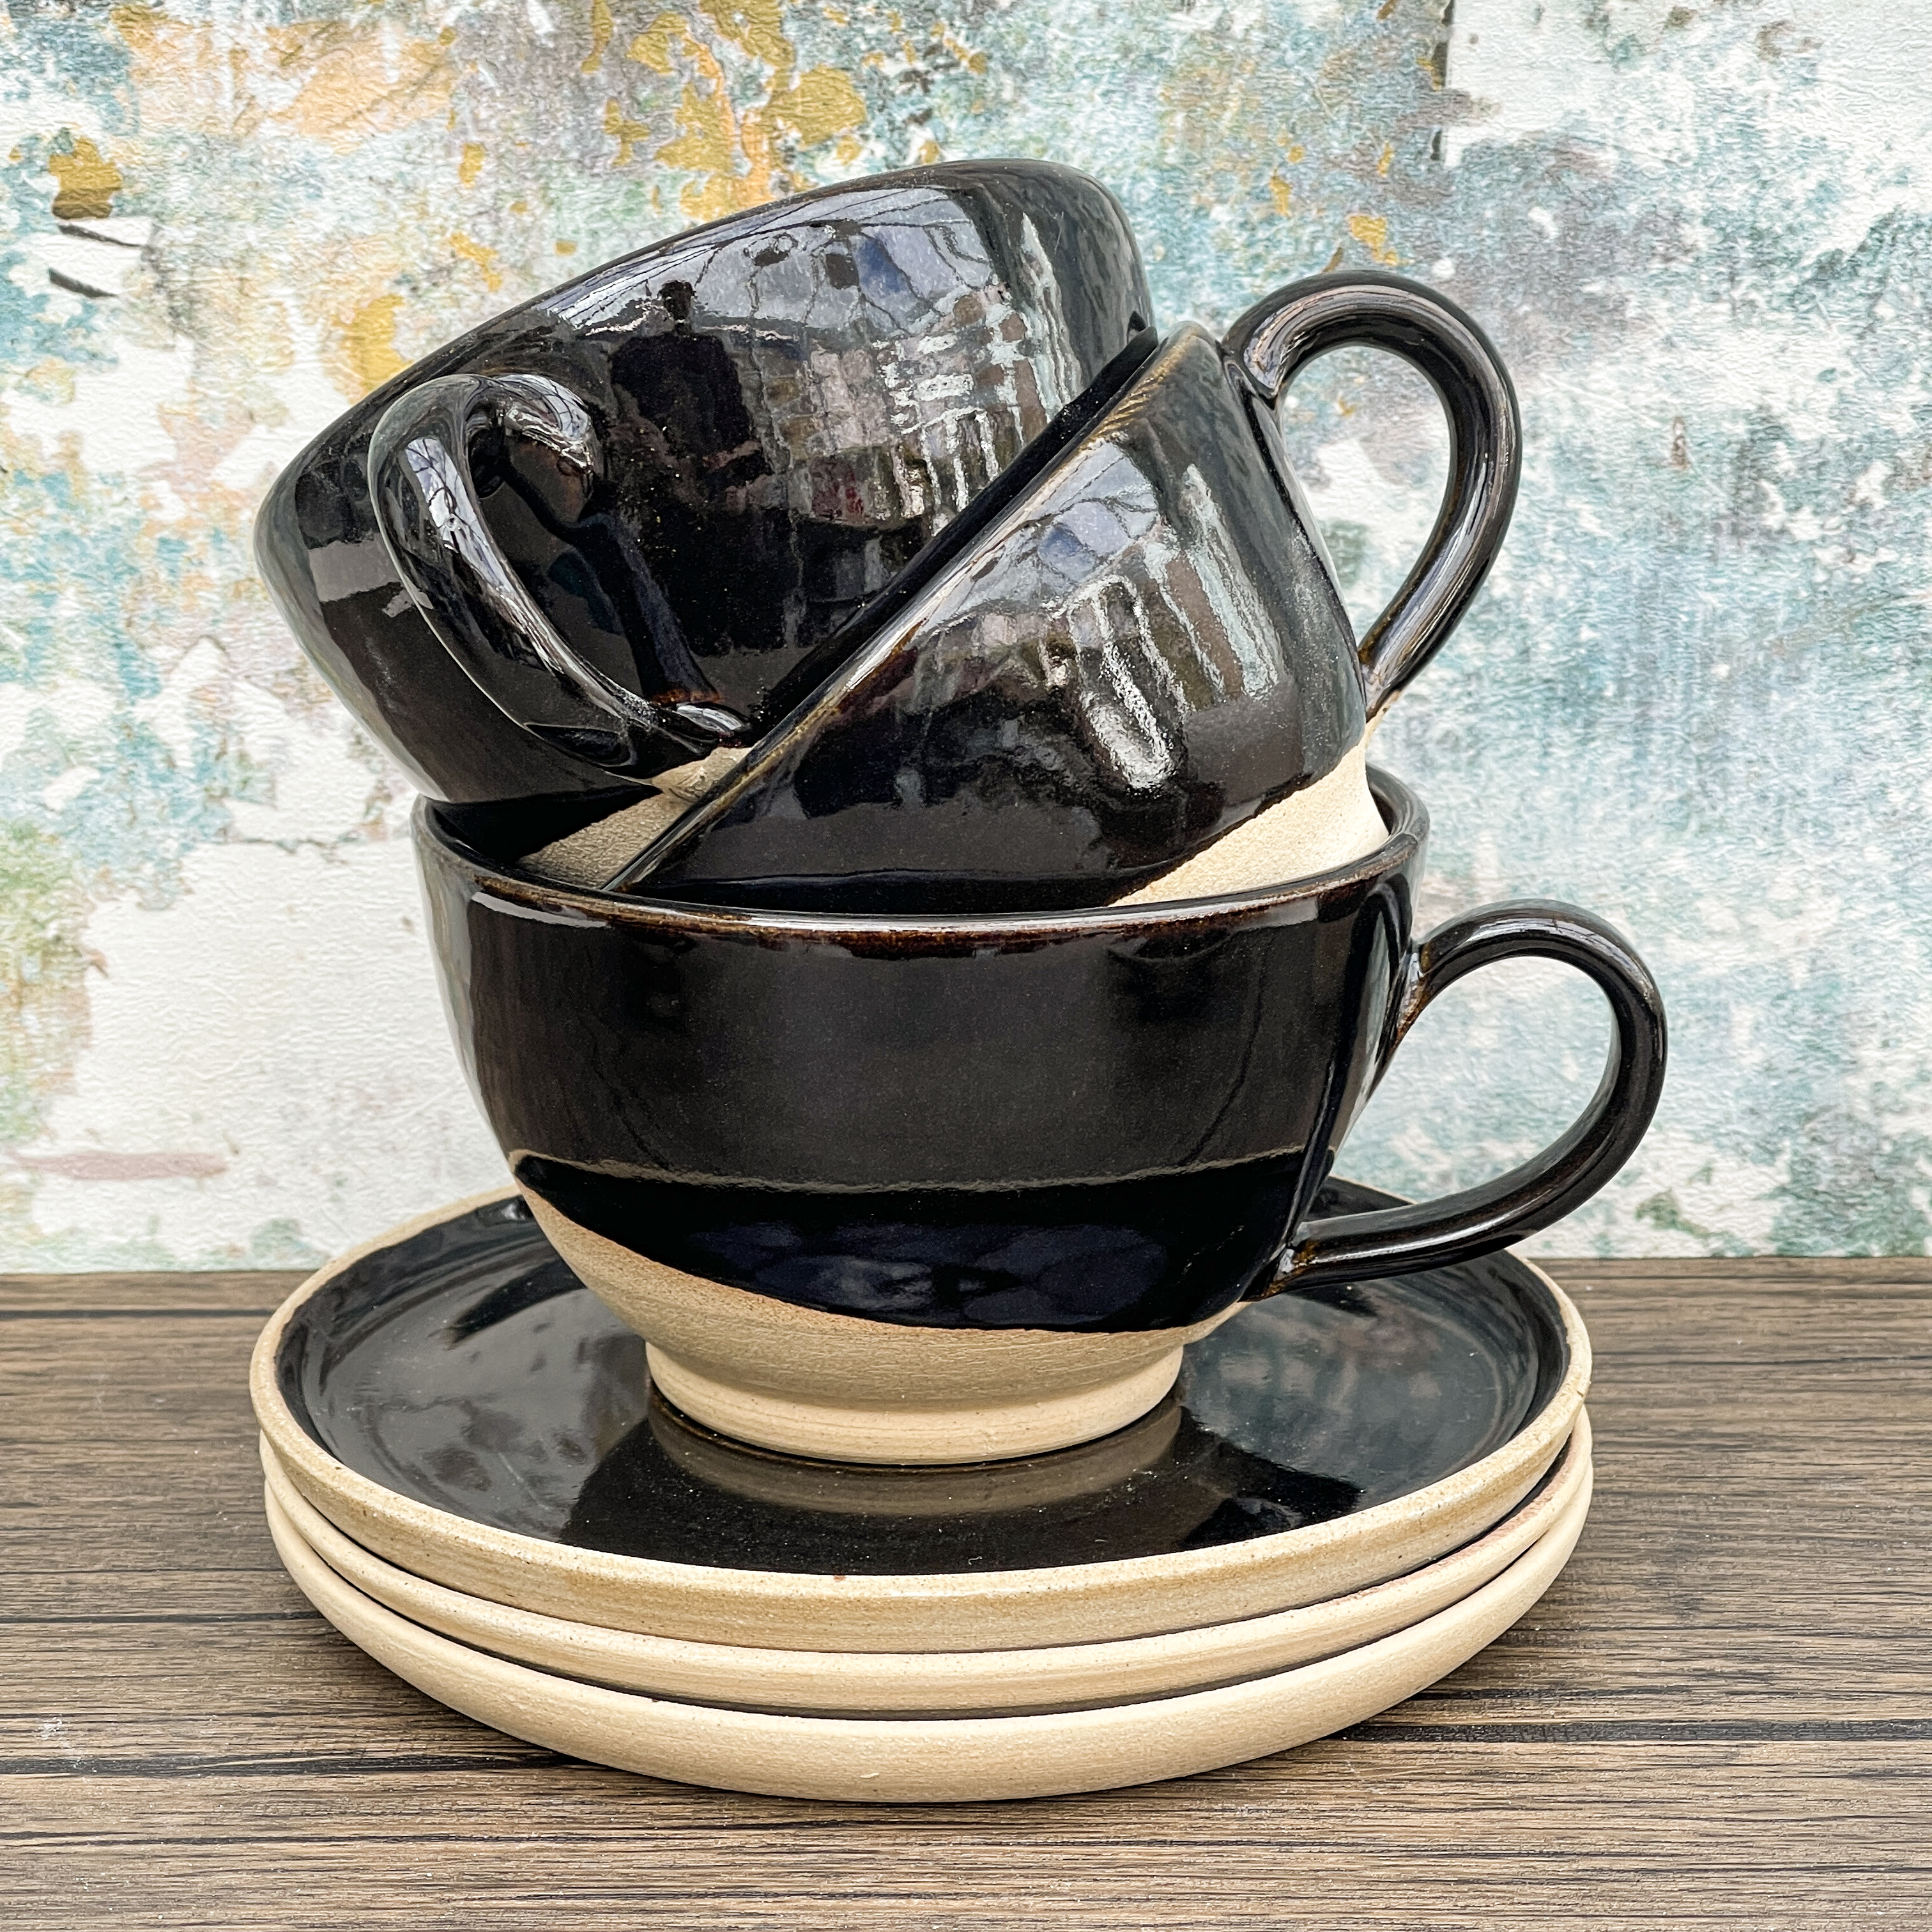 Three half glazed black cappuccino cups stacked inside each other on a wooden table